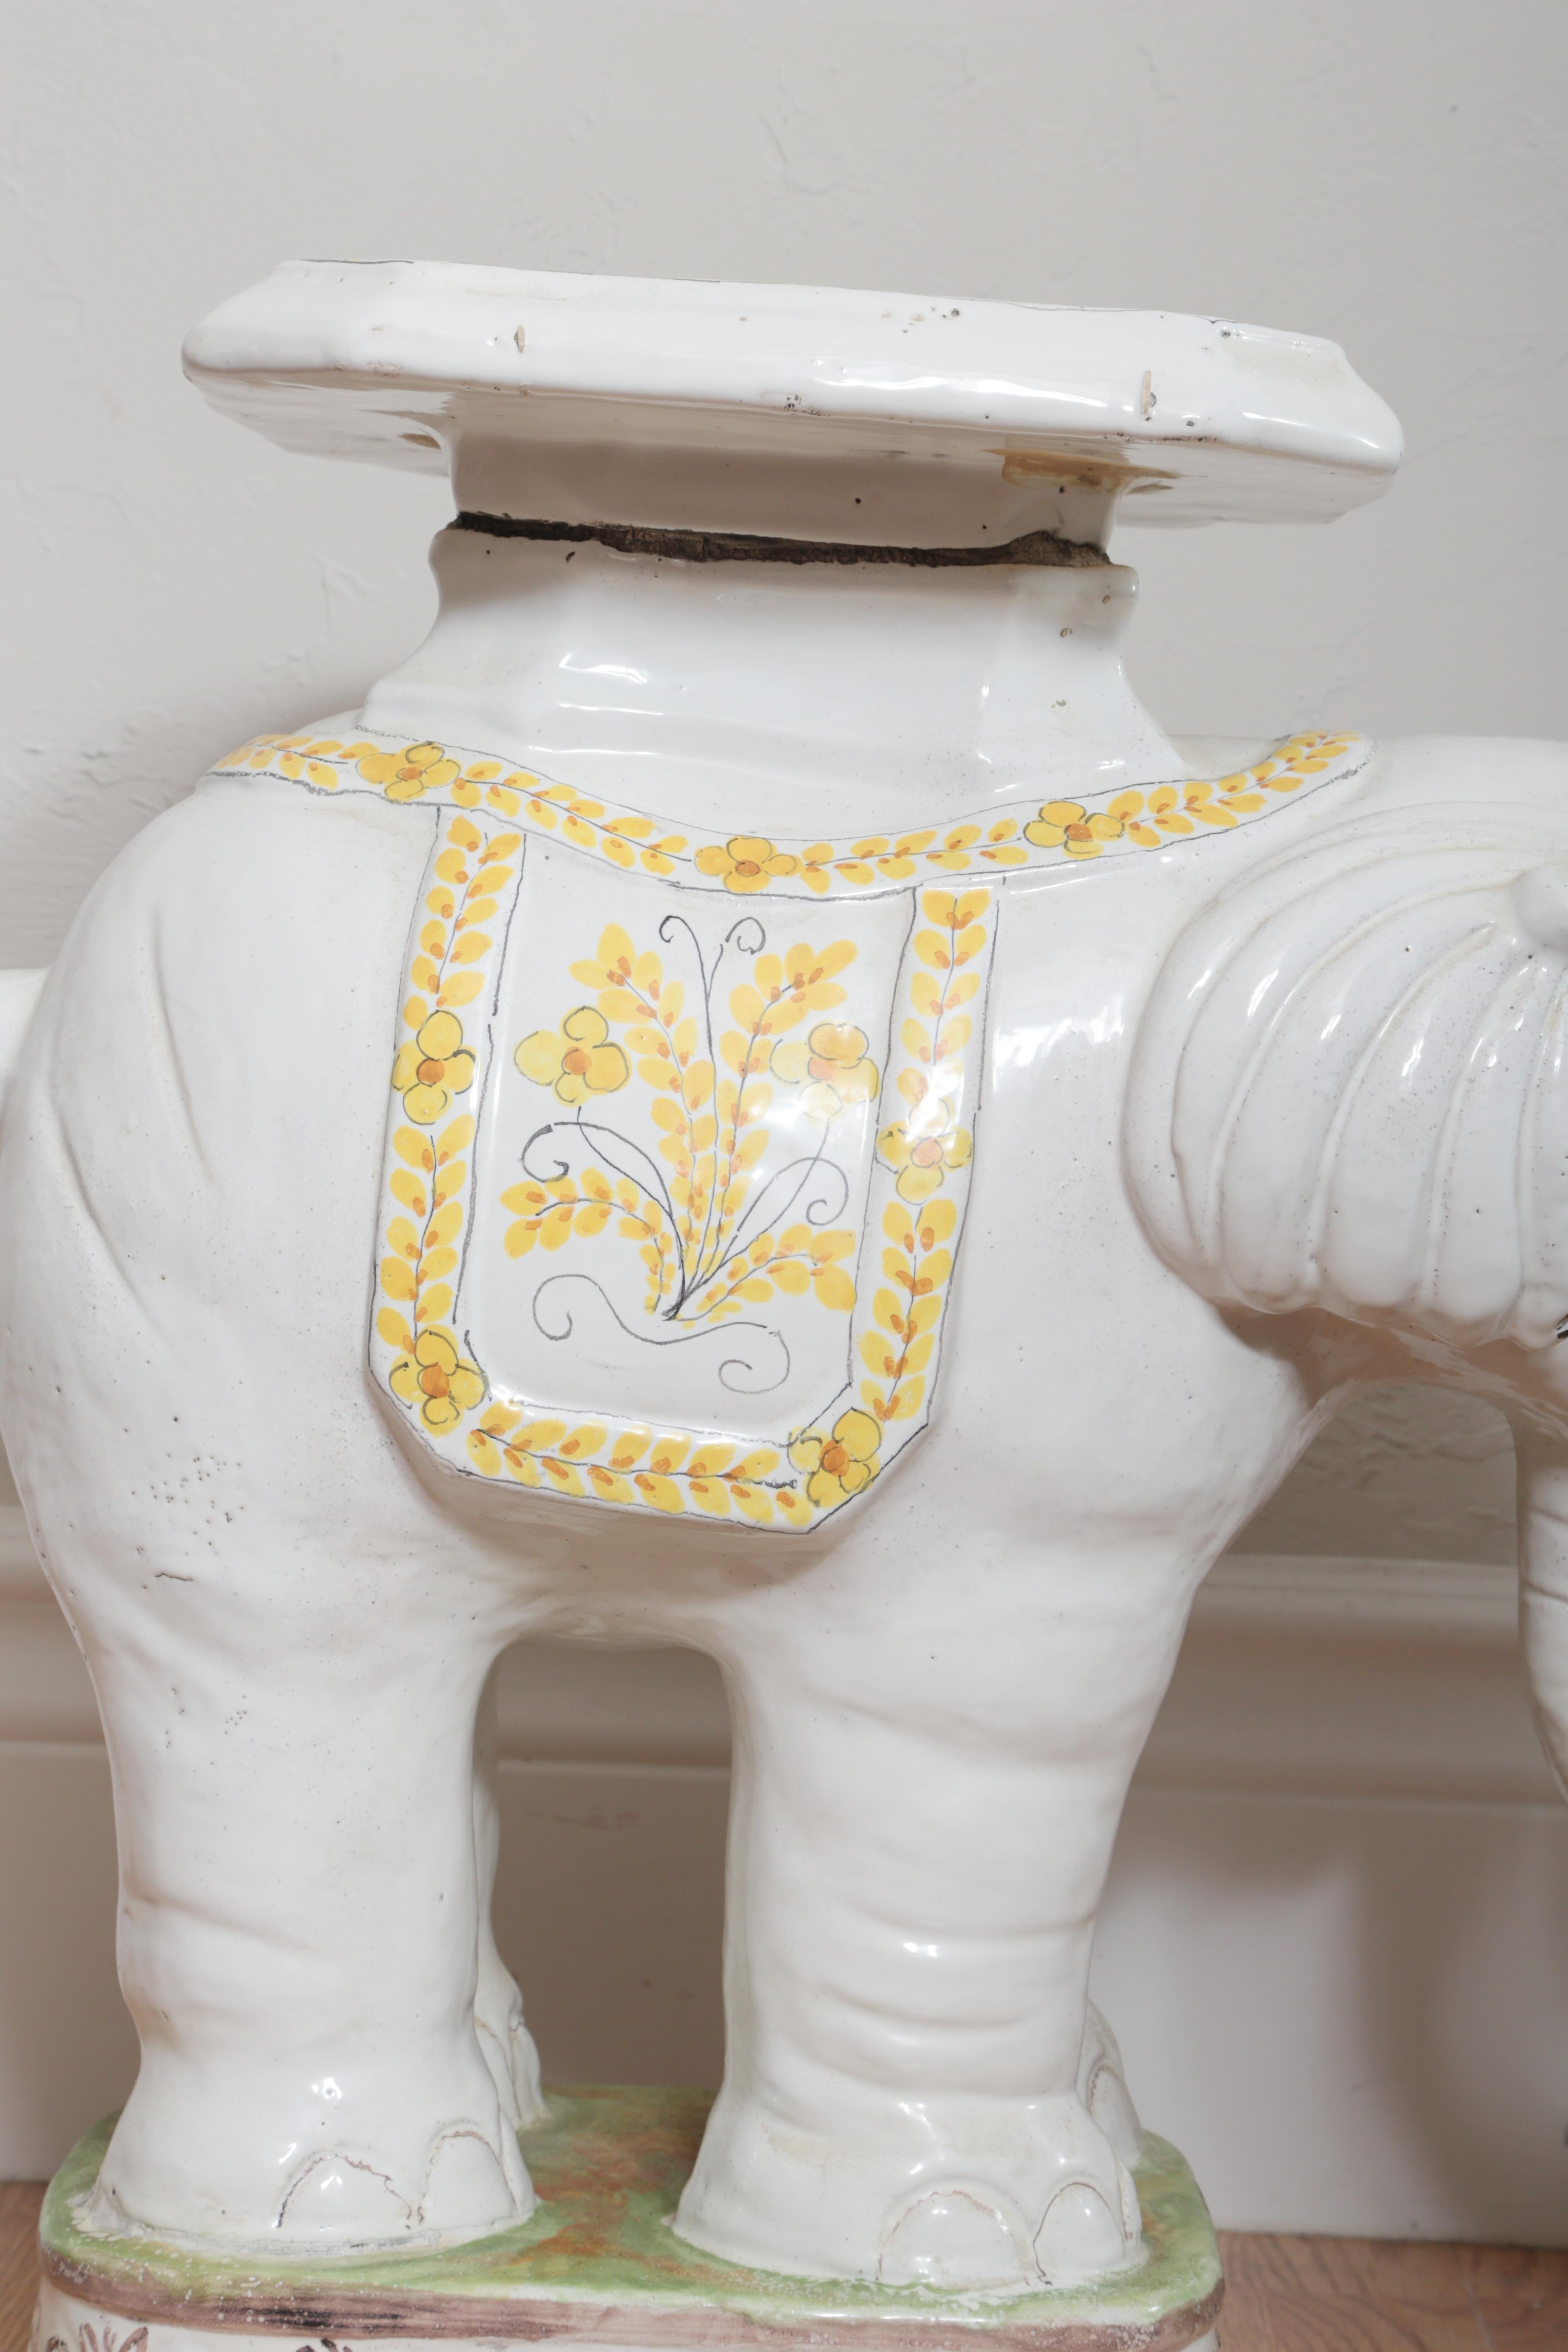 Vintage white glazed terra cotta elephant garden seat with trunk facing upward.
Made in Italy.